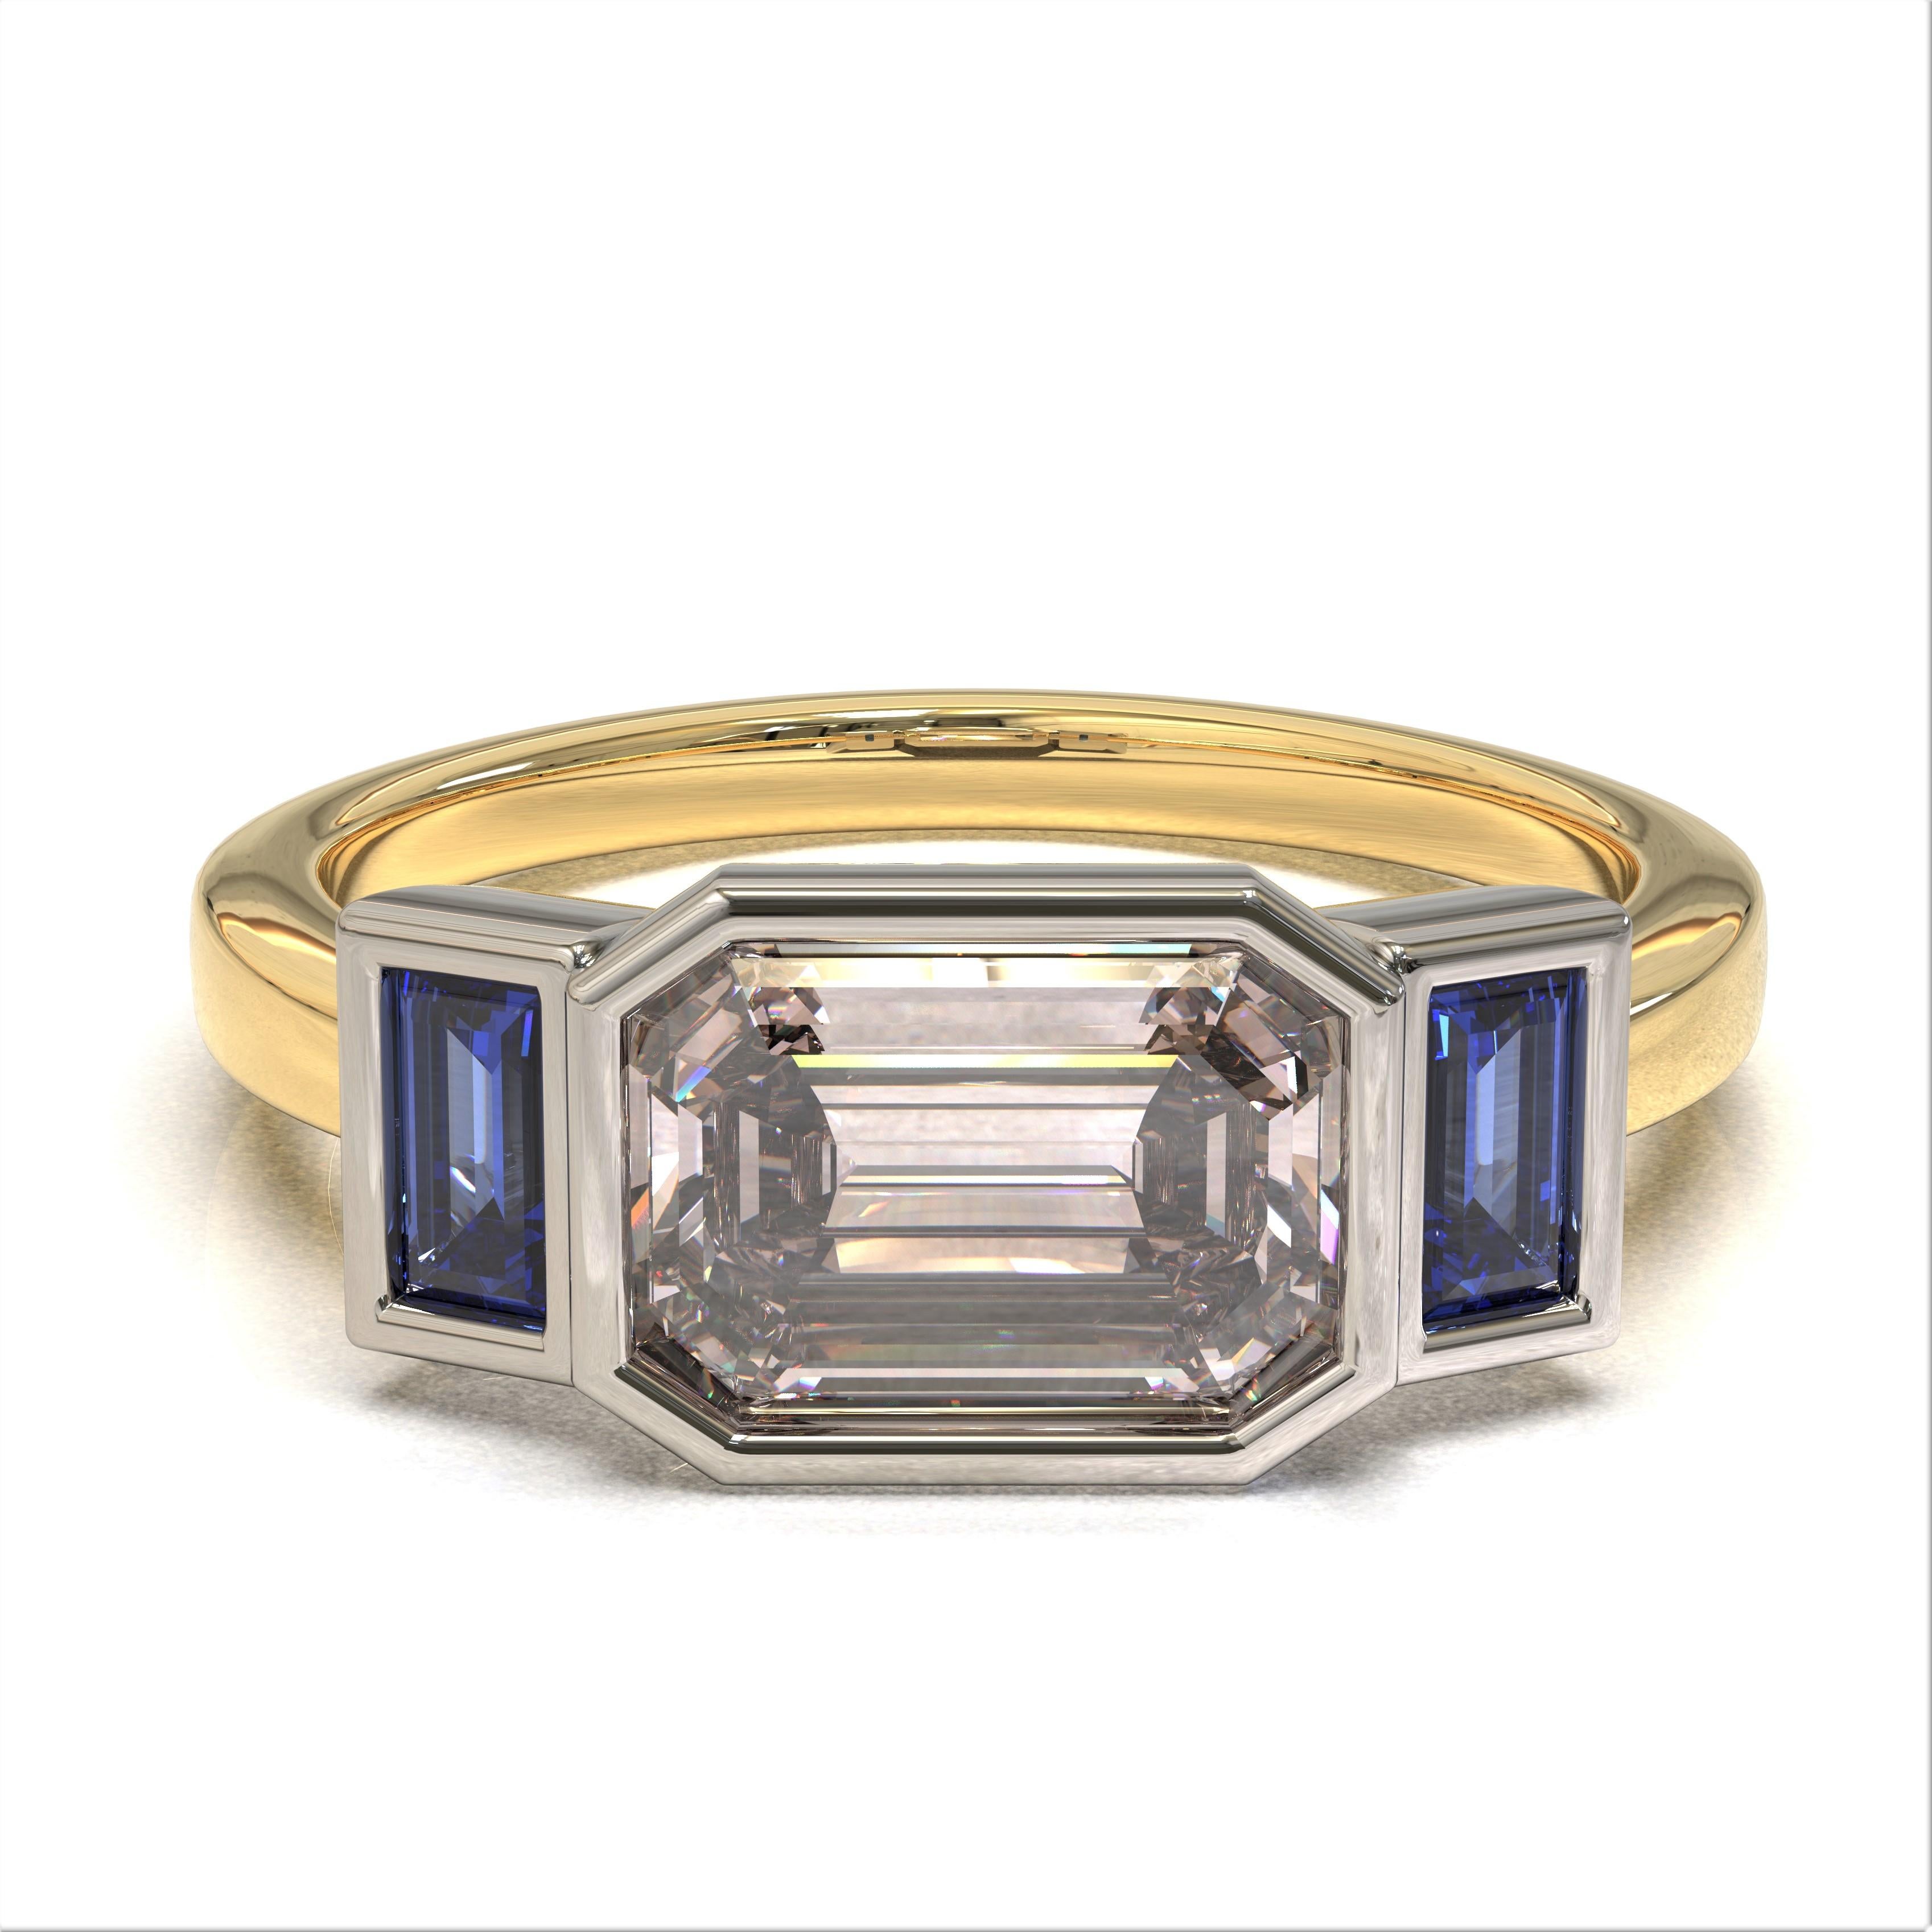 Natural Peach Sapphire & Baguettes sapphire Ring

Beautiful and understated, this platinum and 18 carat yellow gold ring is set with an attractive emerald cut untreated peach sapphire with a finest rectangular baguette cut blue sapphire on either